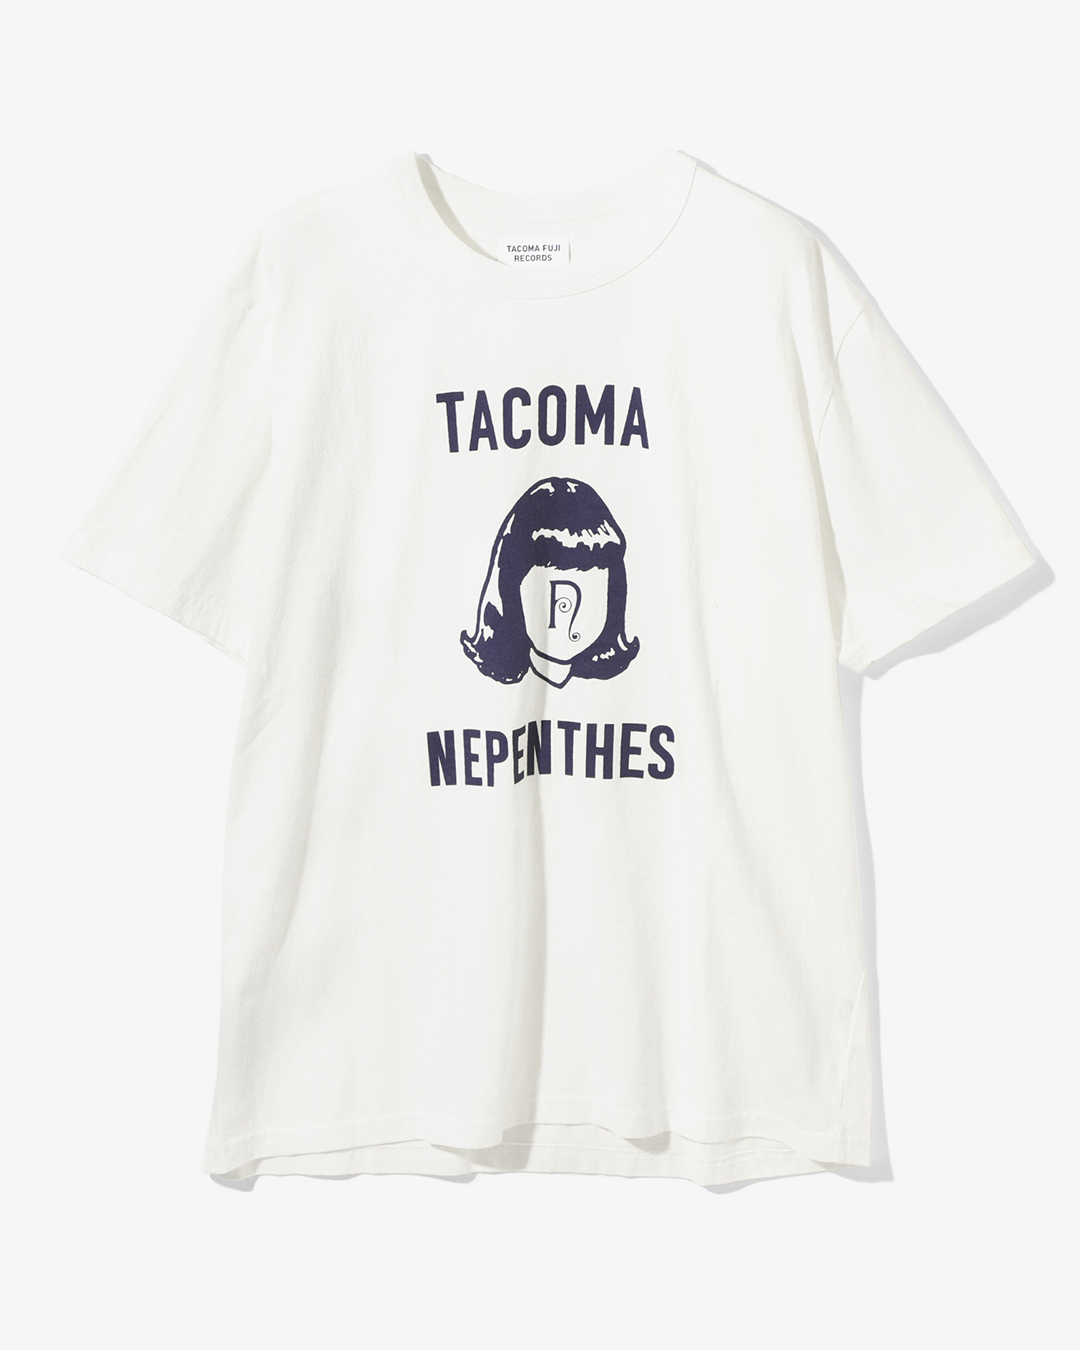 SOUTH2 WEST8の別注アイテムも登場。TACOMA FUJI RECORDSがNEPENTHES 